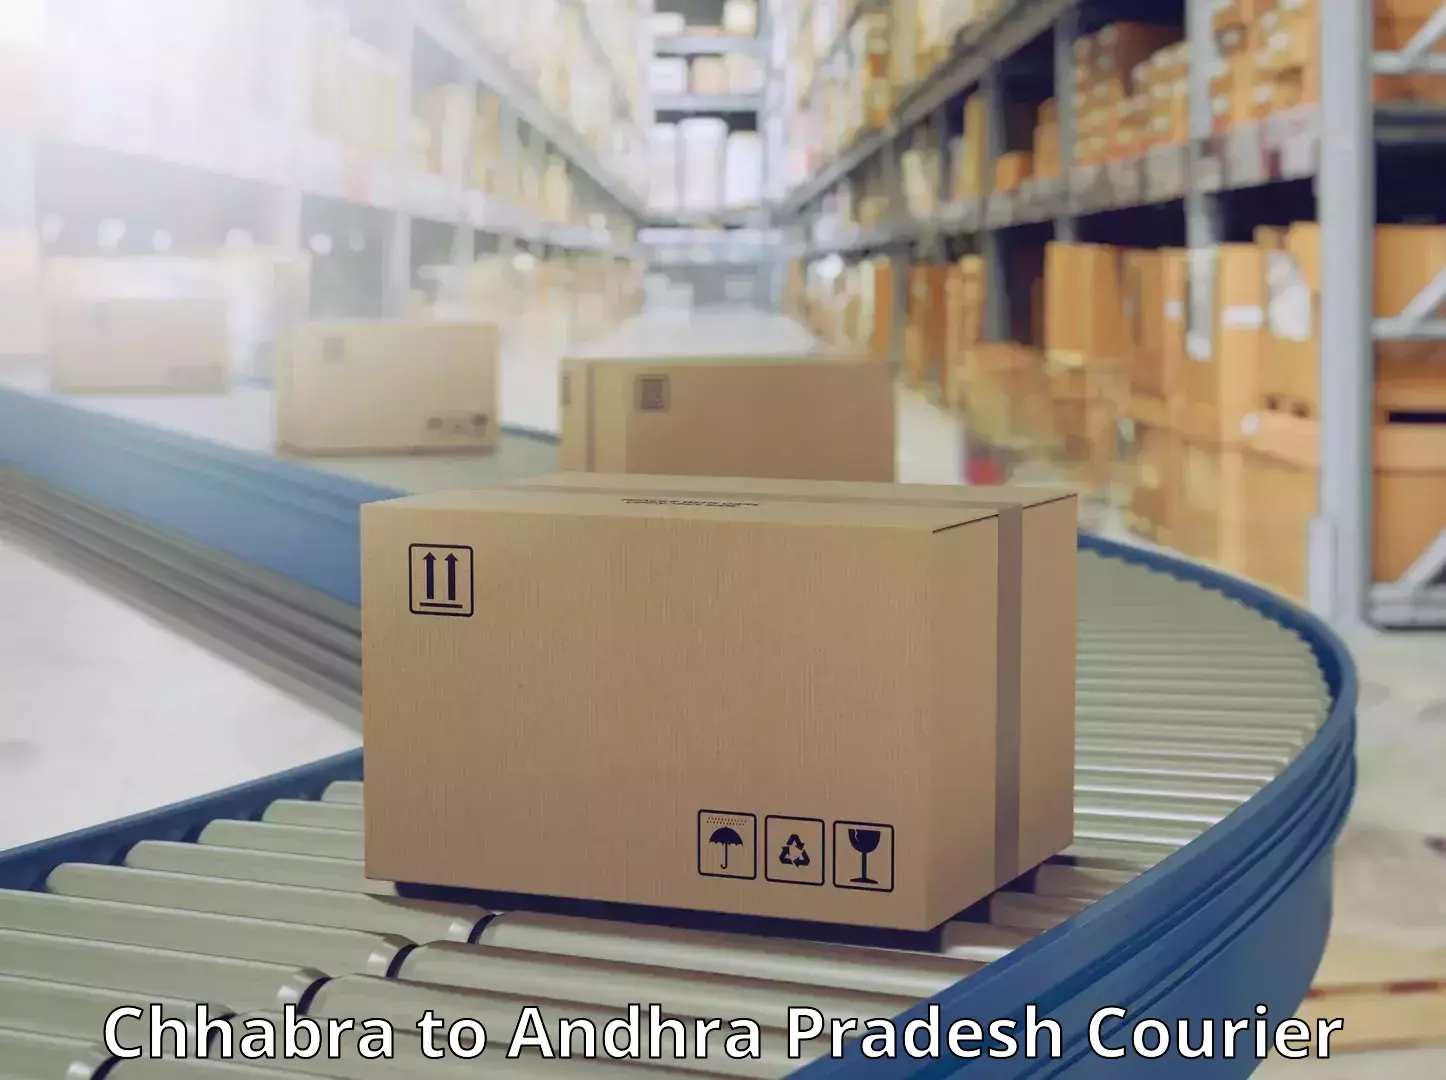 Express delivery network Chhabra to Andhra Pradesh